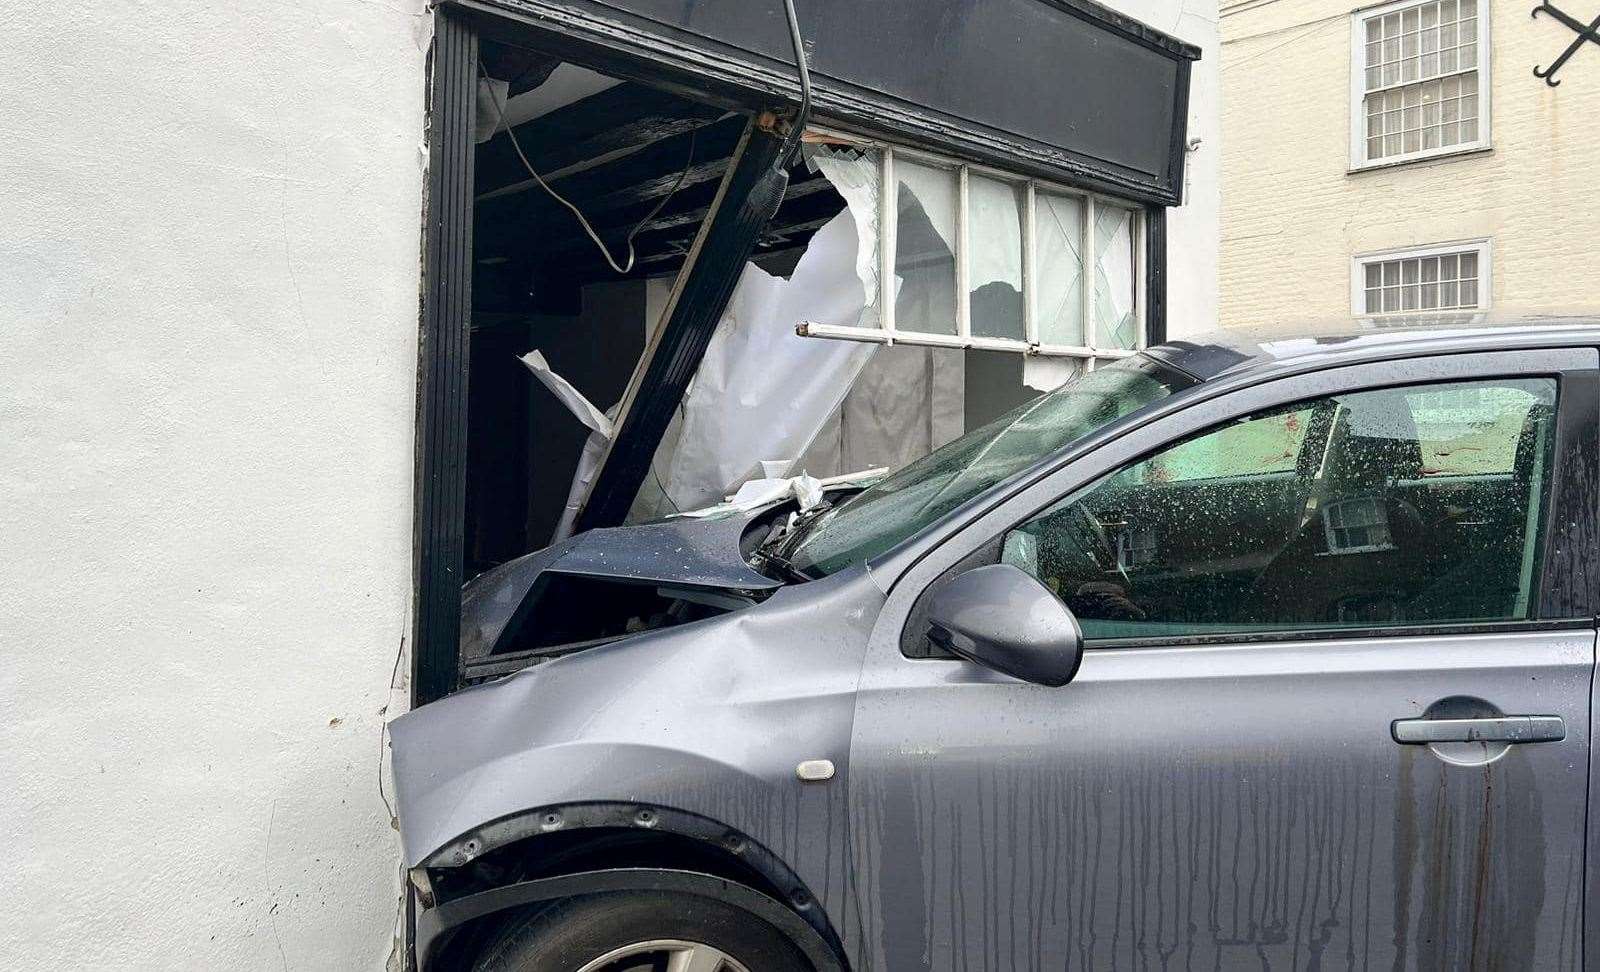 A Nissan Qashqai crashed into the side of a building on the A2 High Street in Newington. Picture: Newington History Group